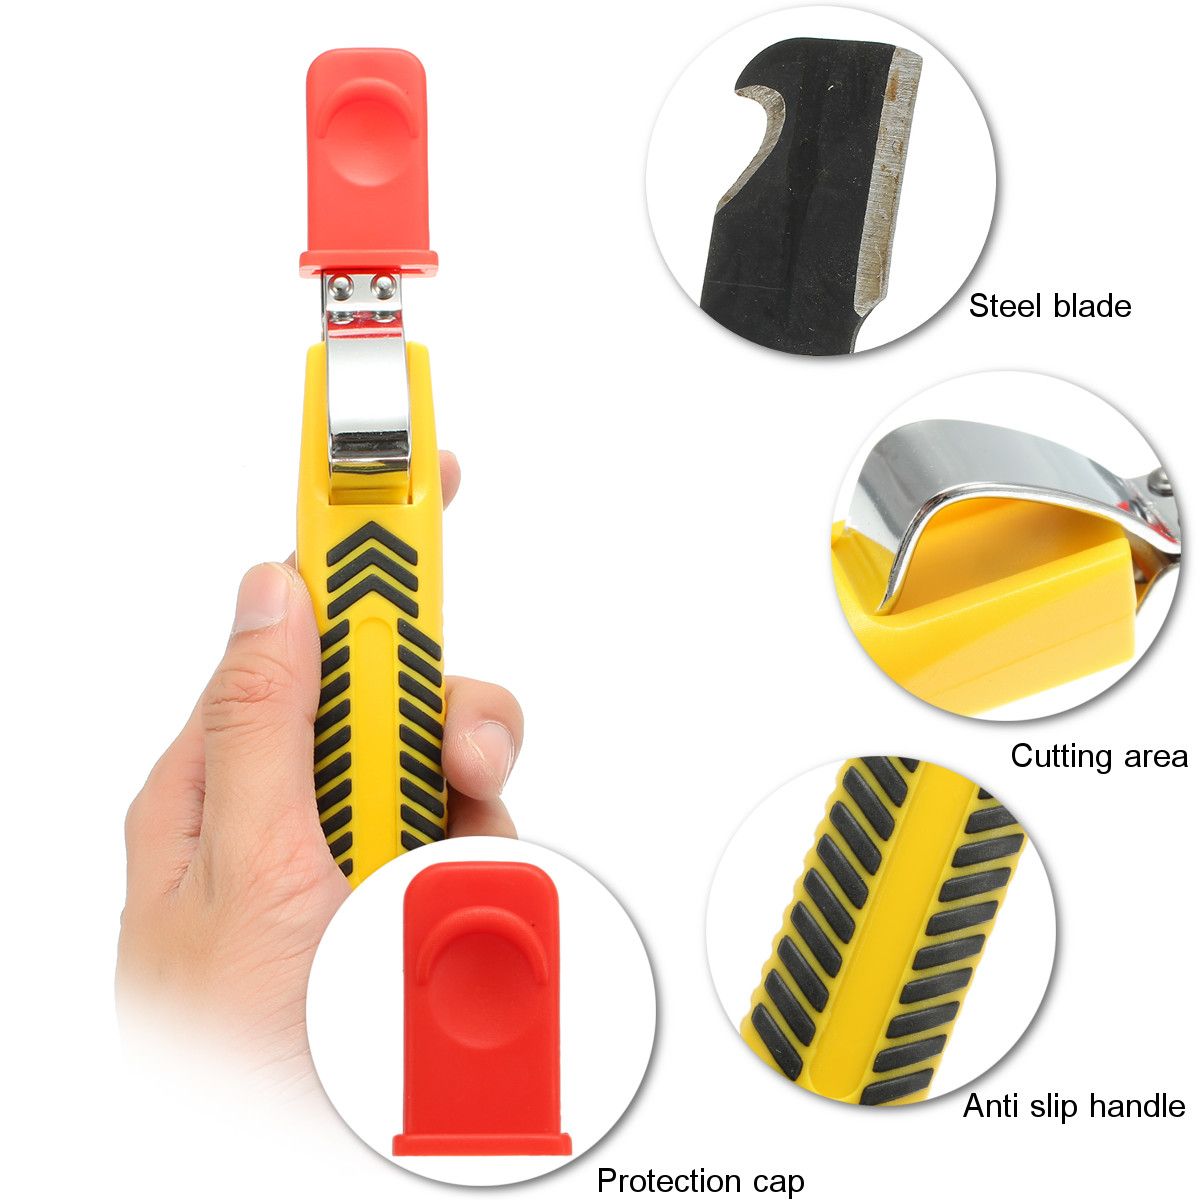 Secura-Cable-Cutter-Stripping-Tool-8-28mm-Cable-Cutter-Stripper-Stripping-Cutter-Hand-Tool-1239629